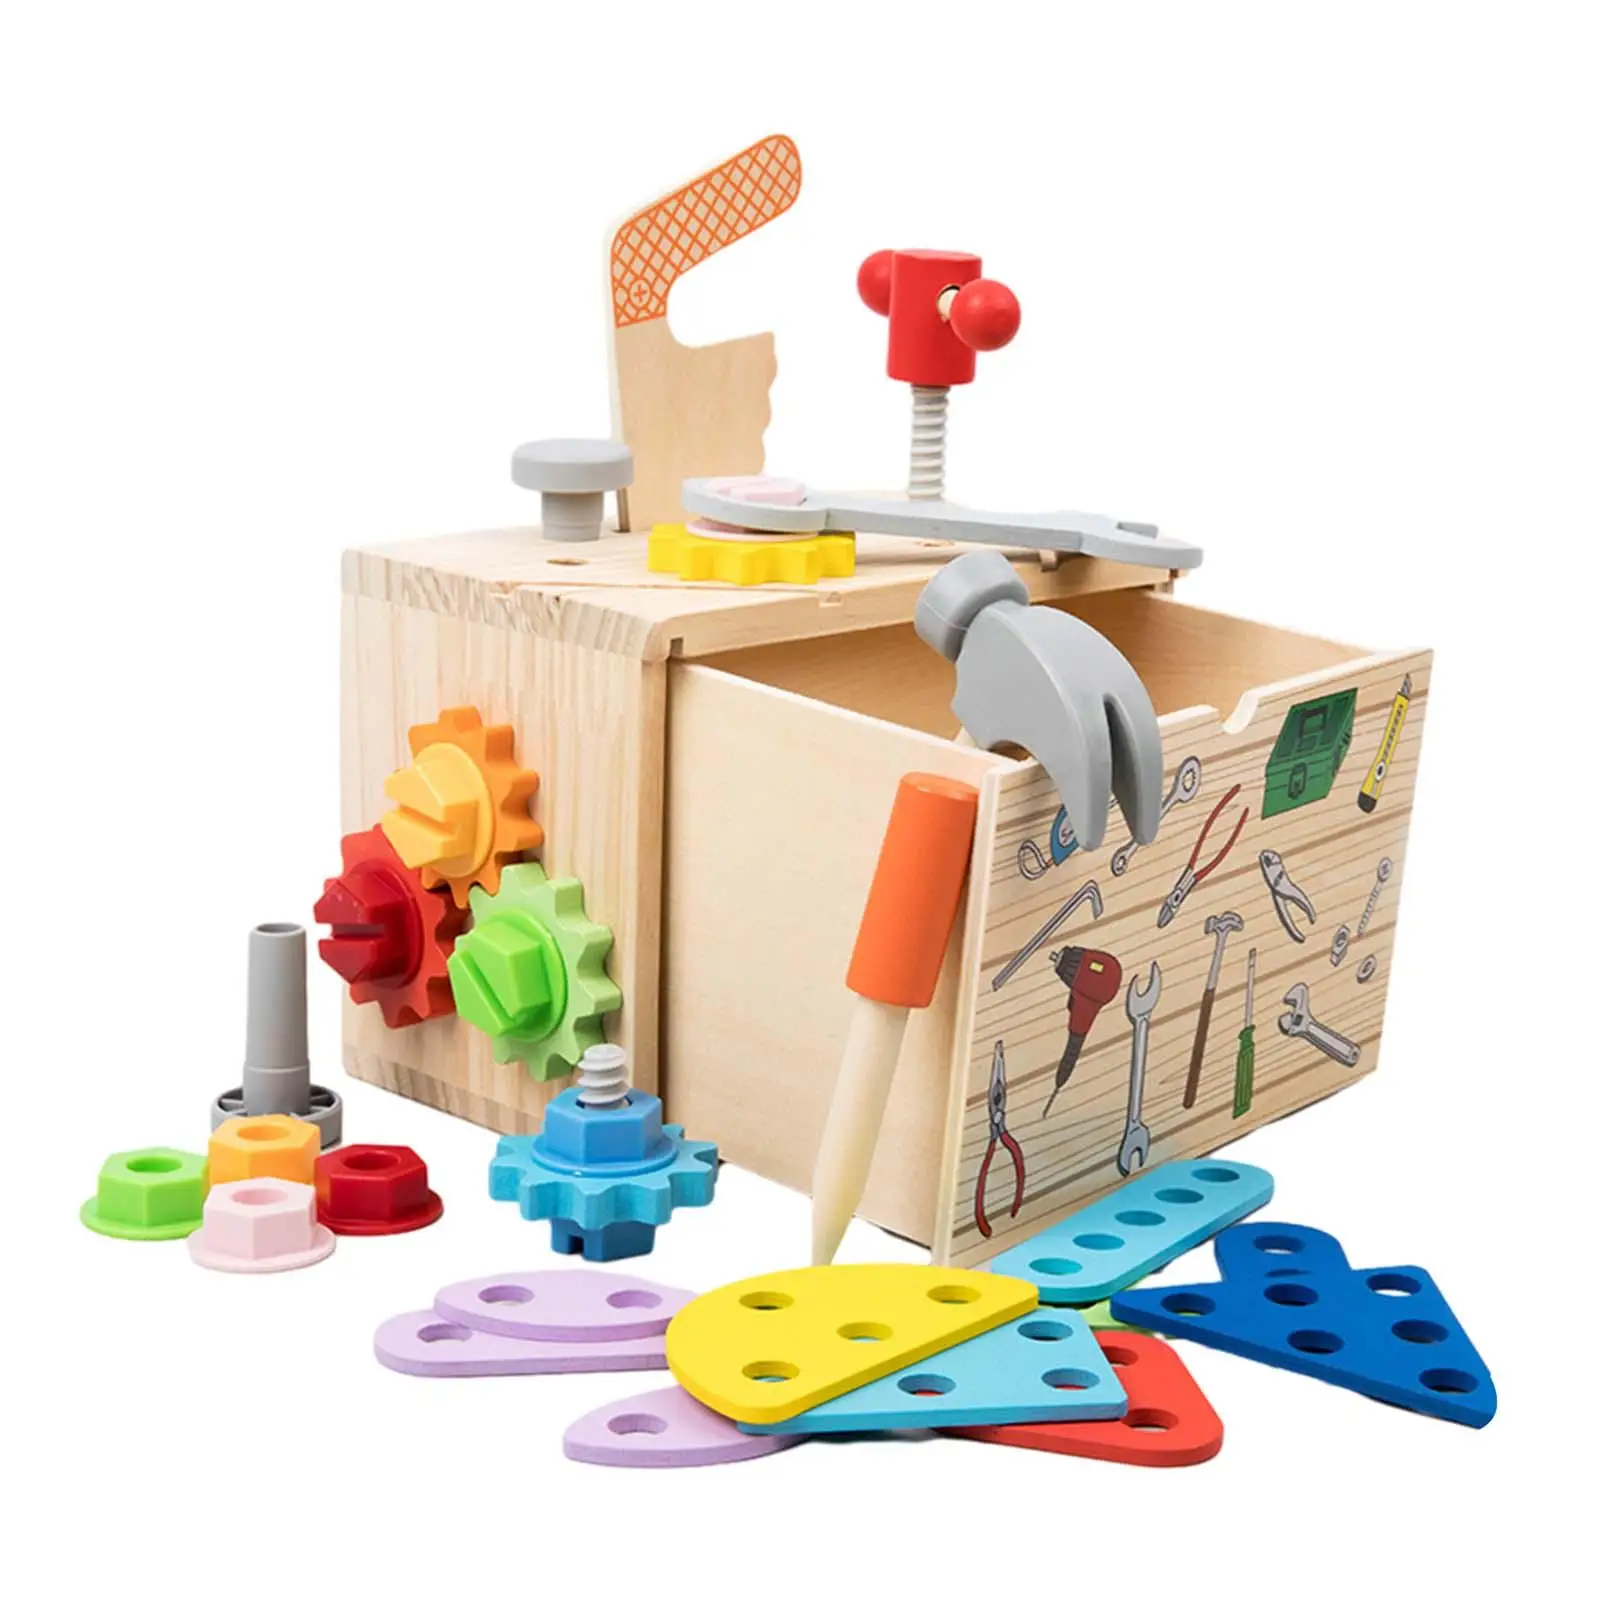 Wooden Toolbox Toy Fine Motor Skill Playset DIY Pretend Play Construction Toy for Ages 3+ New Year Girls Boys Holiday Present